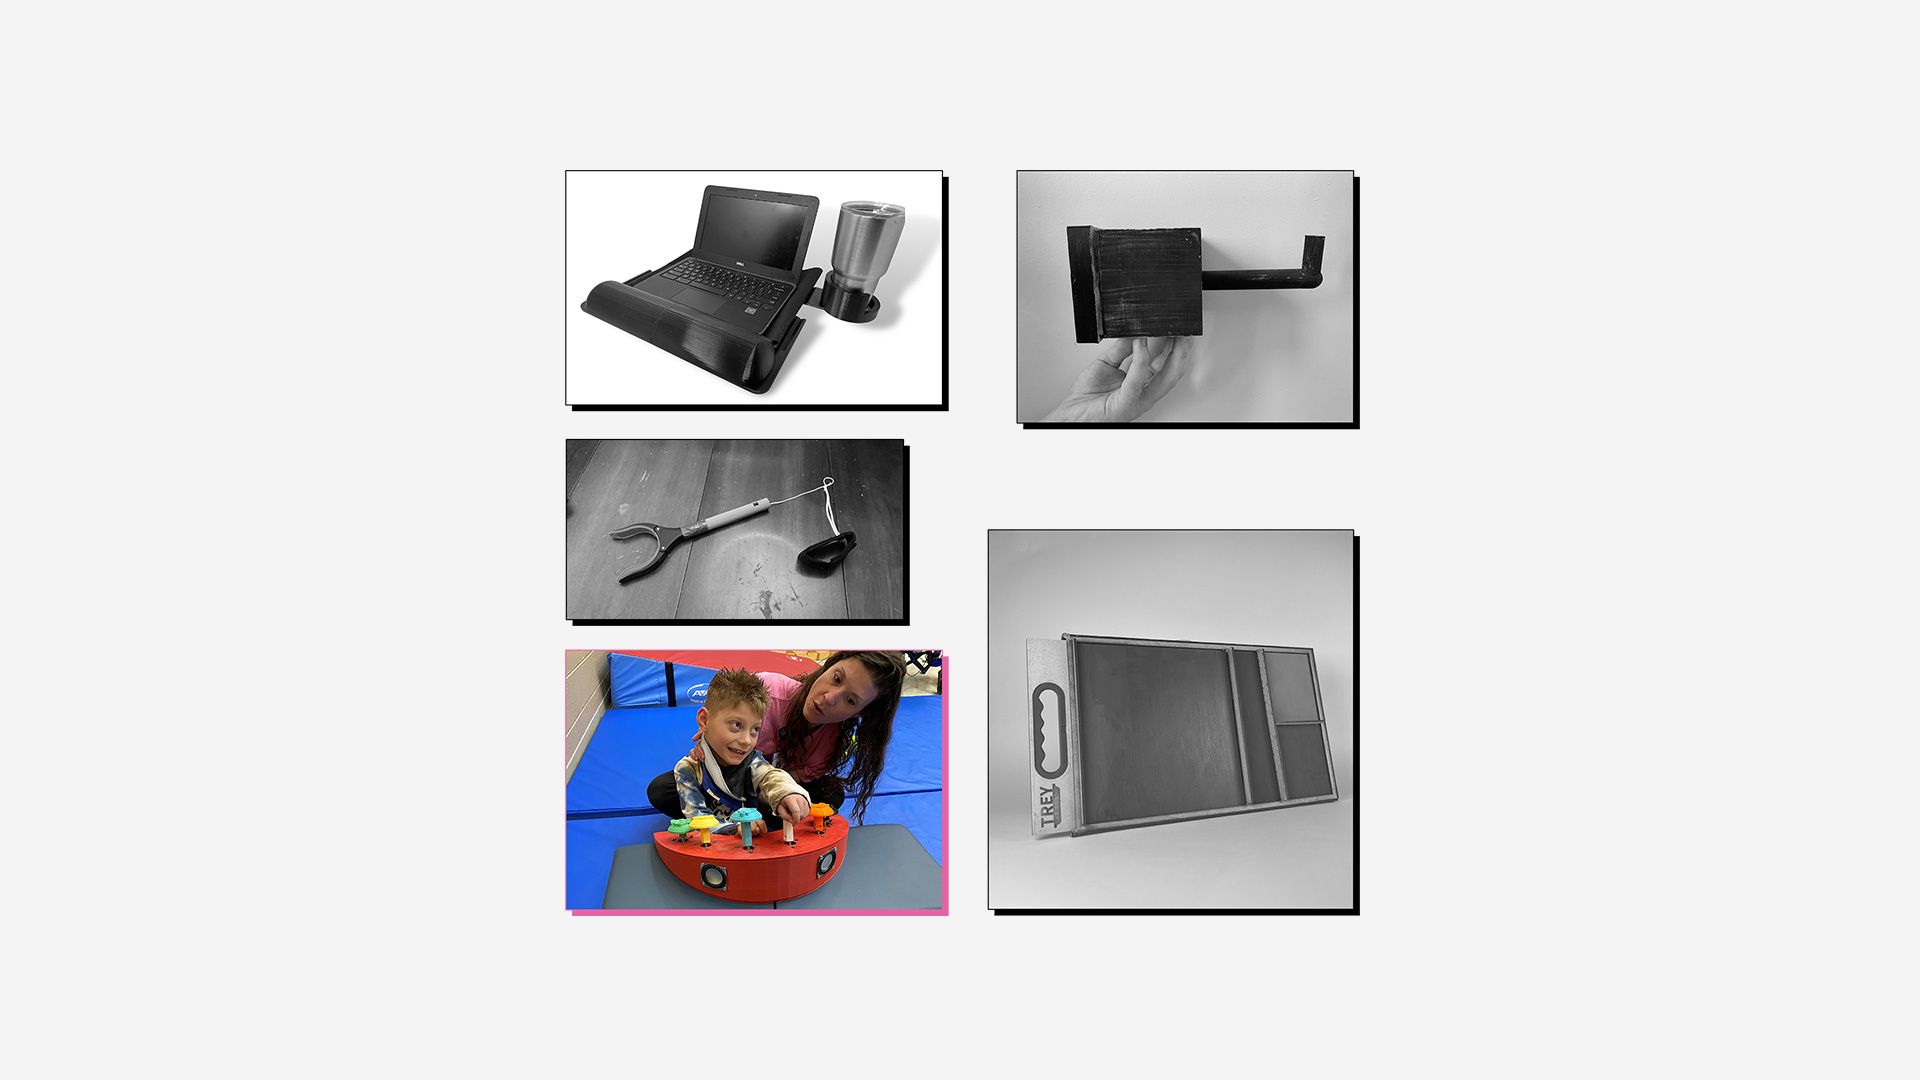 Collage of 3D printed assistive devices with winning entry (sound toy) highlighted.